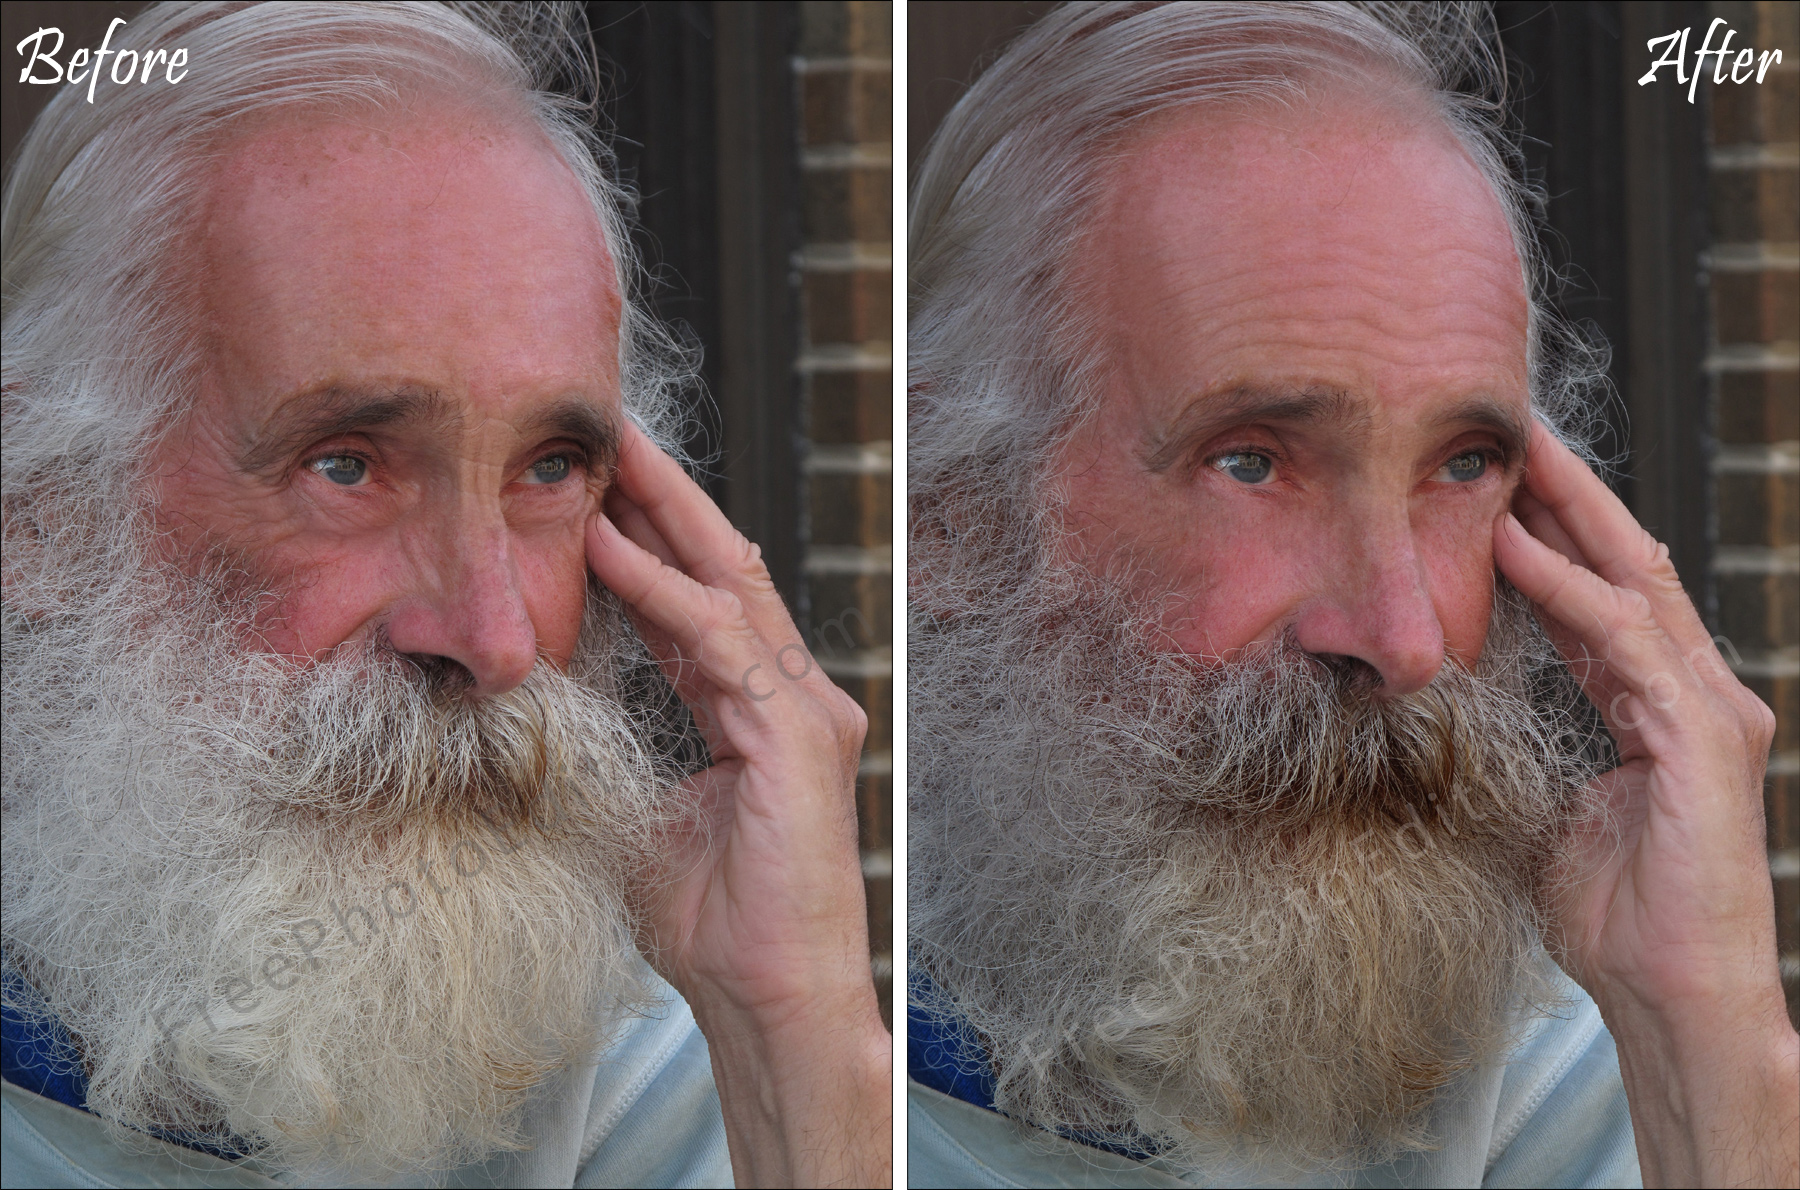 Before & after photo retouching sample of age reduction by 20 years (85-year-old man now looks about 60 to 65 years old).